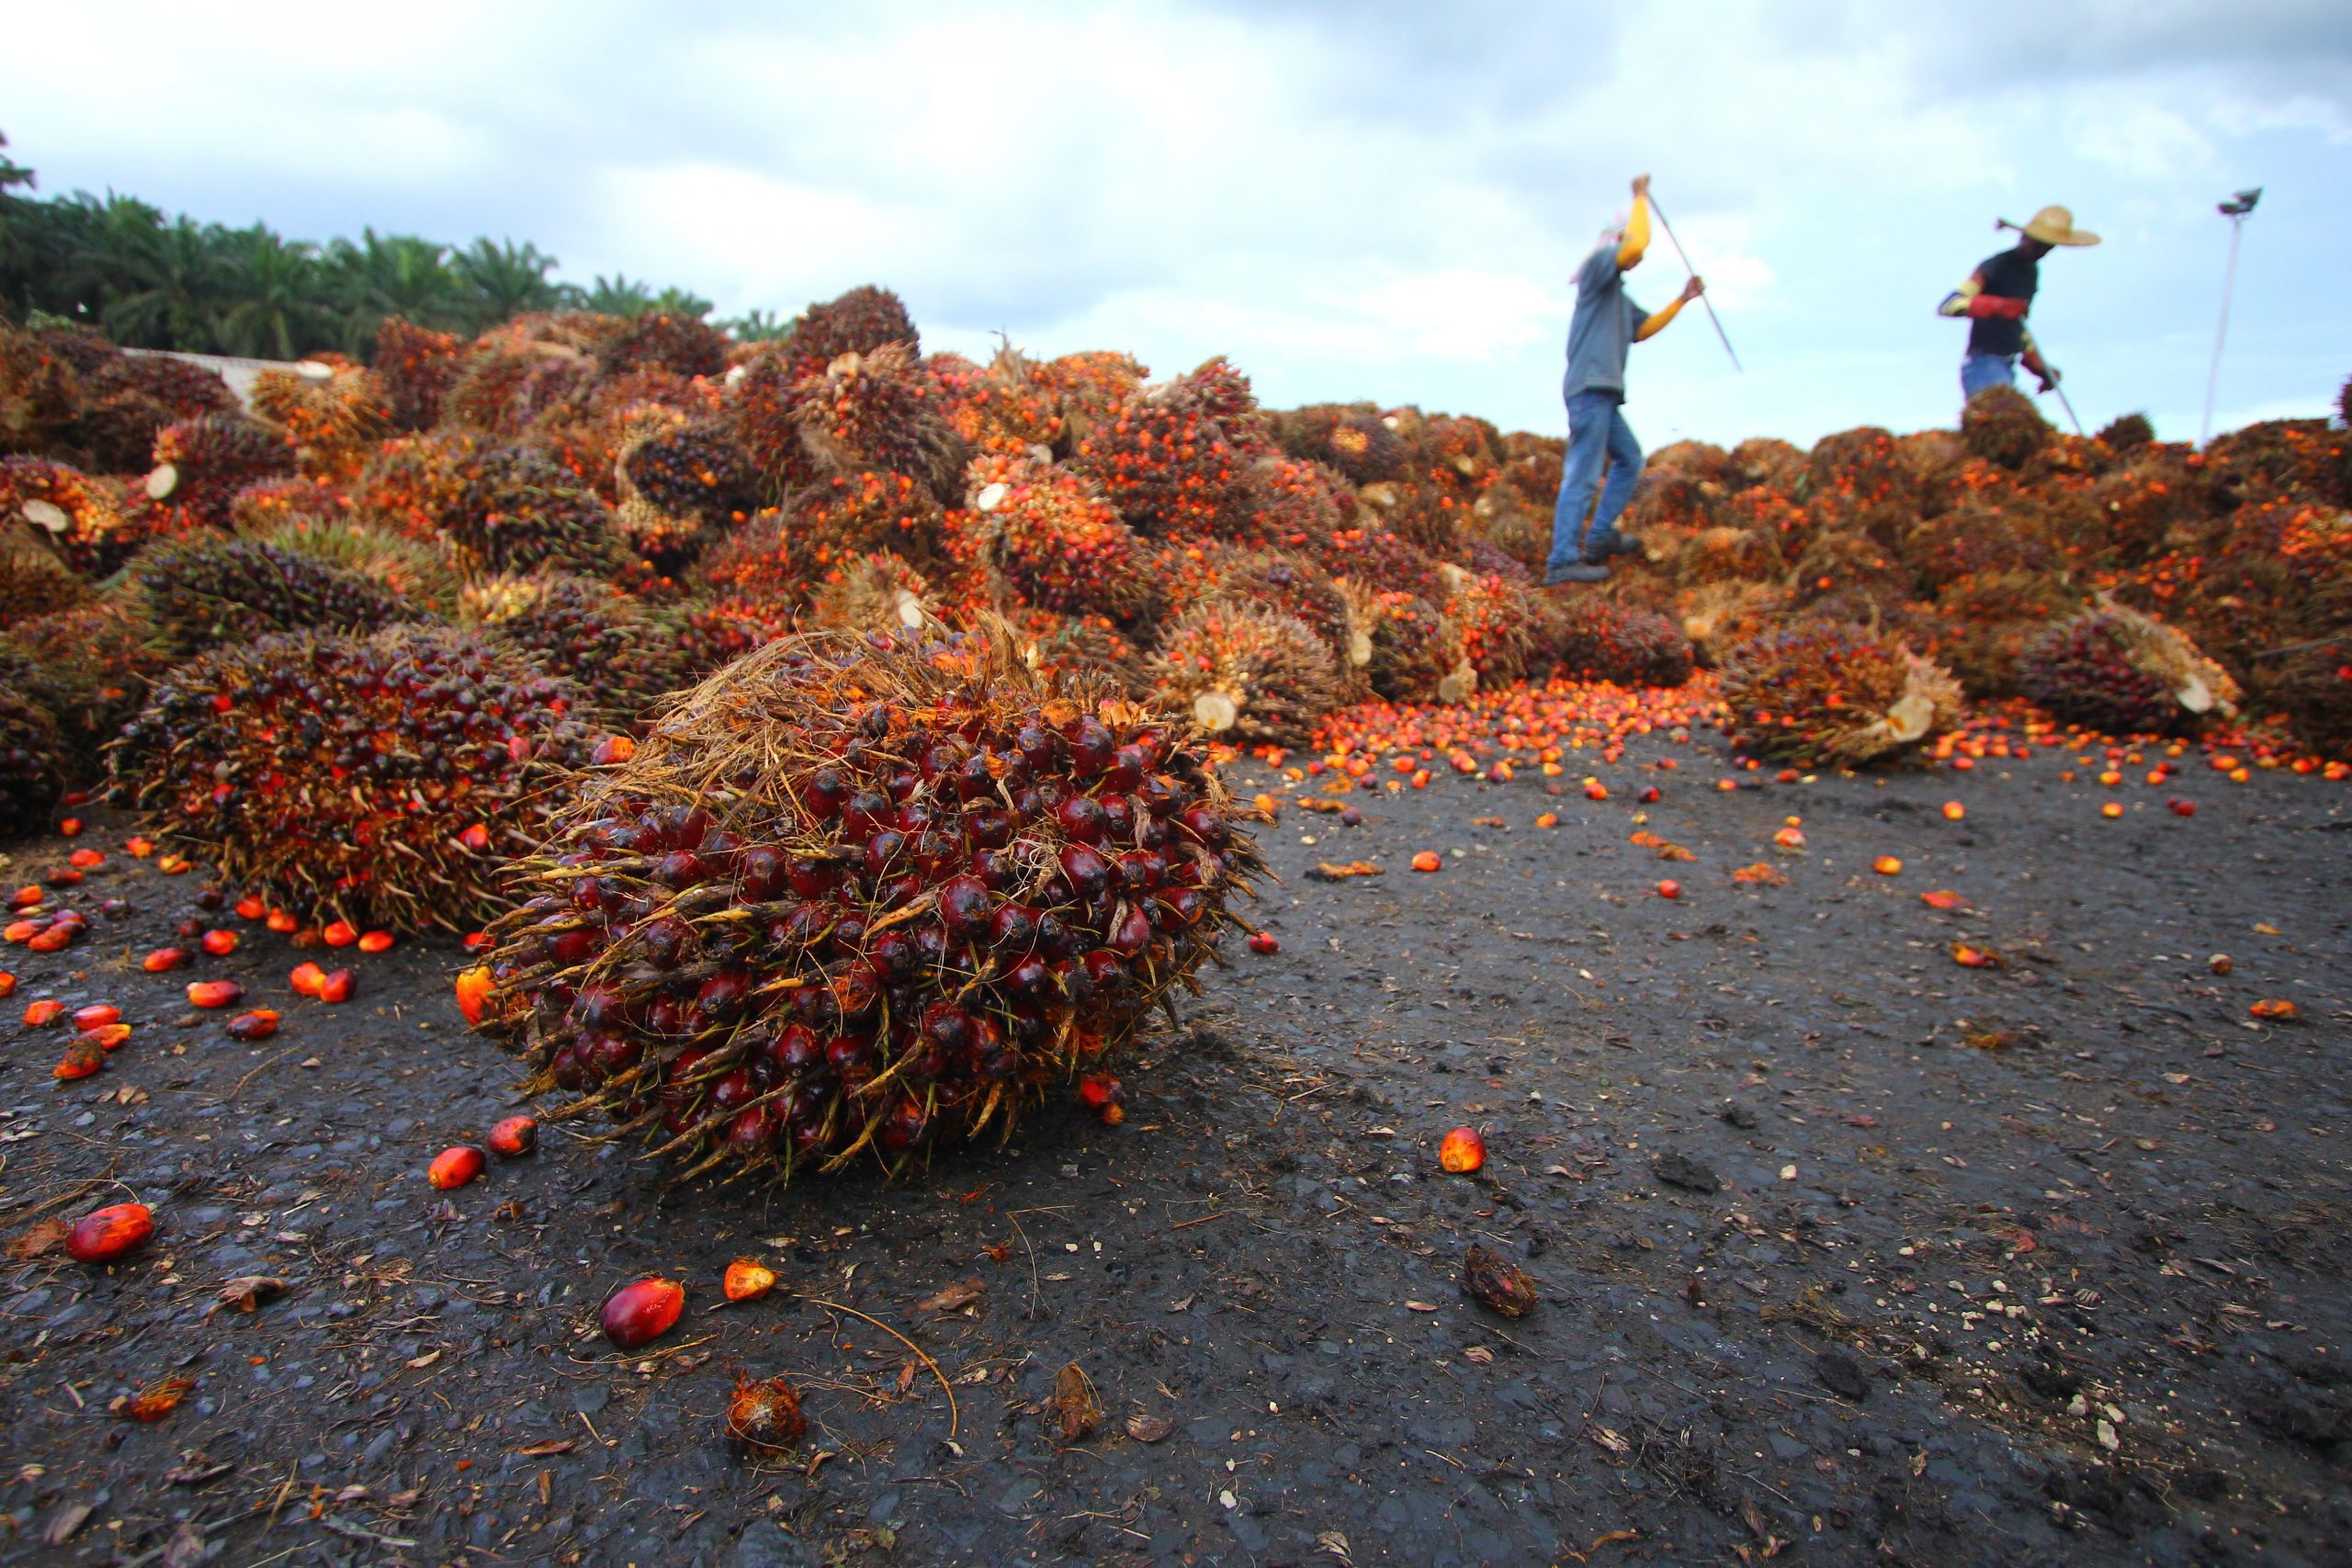 France doesn t want to rely on Brazilian crops. Photo: Shutterstock